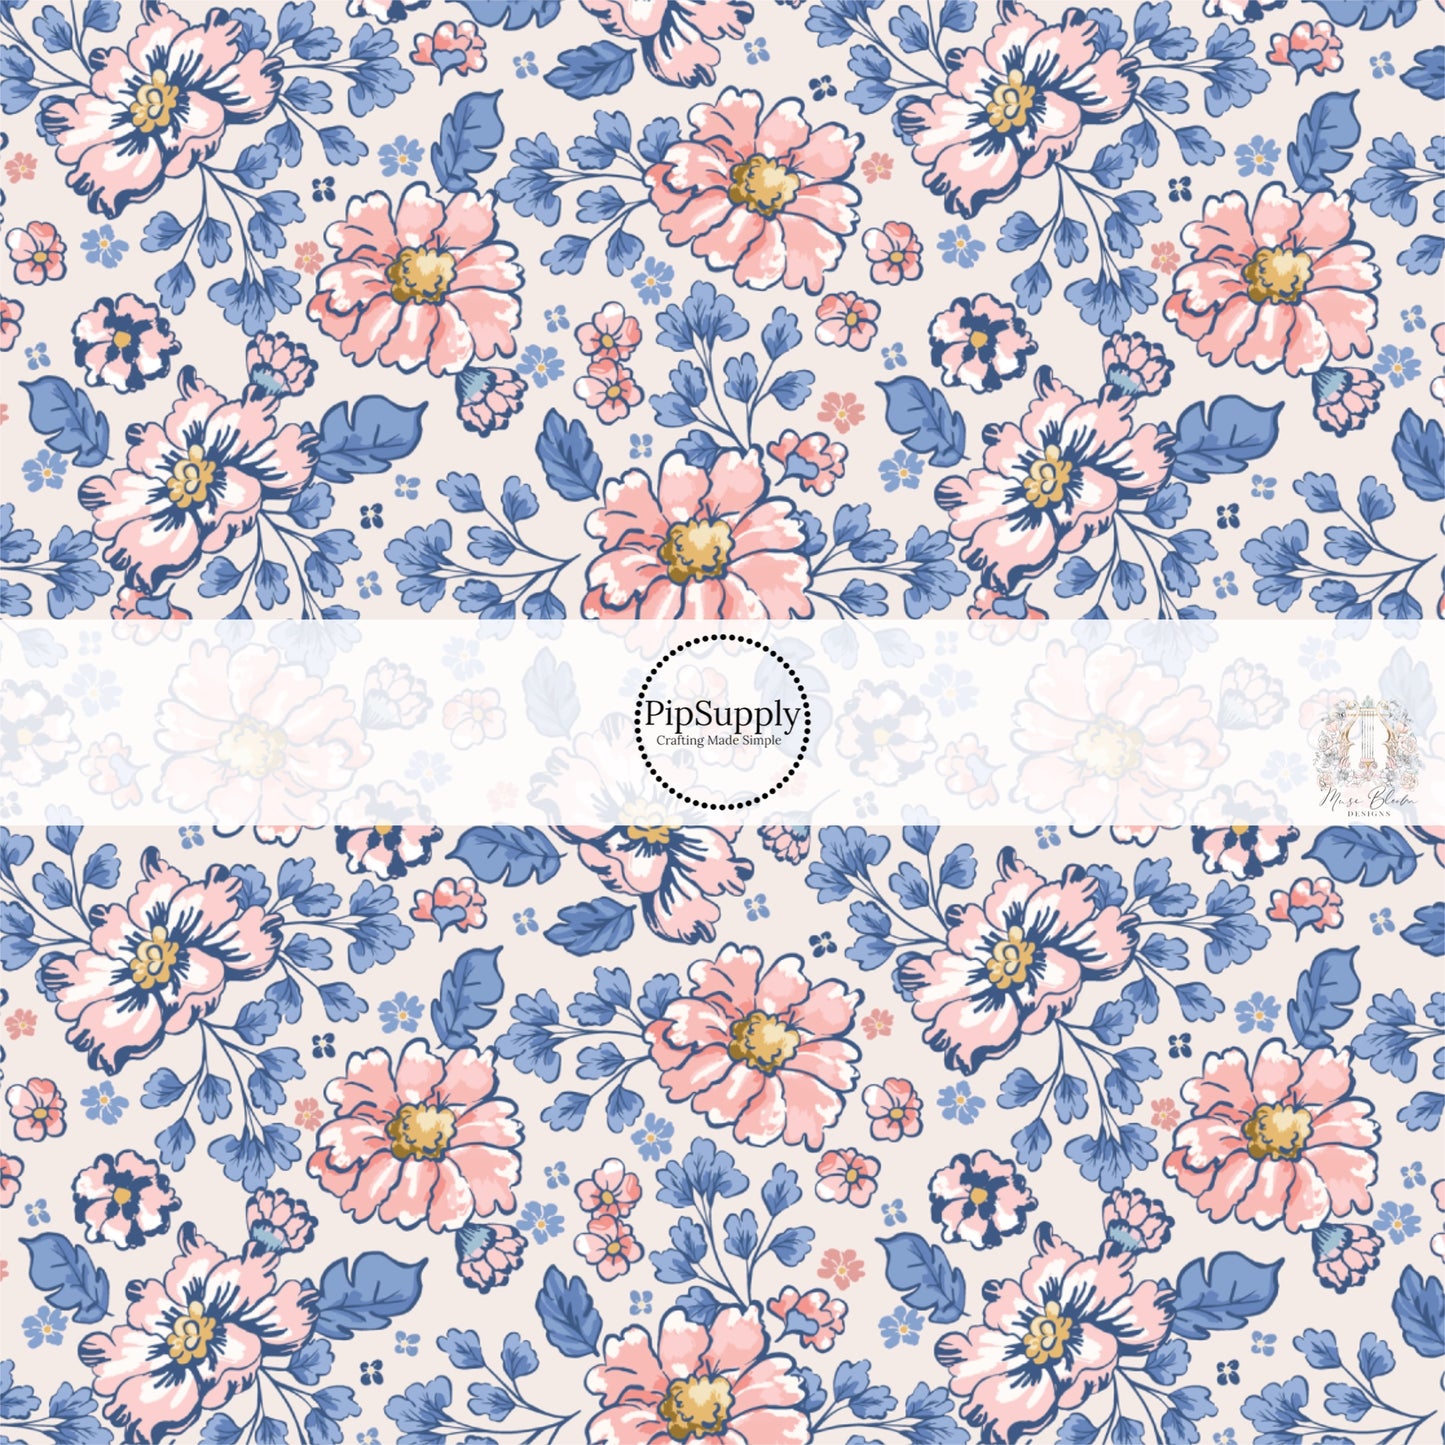 These floral themed cream fabric by the yard features peach, light pink, and blue flowers on cream. This fun summer floral themed fabric can be used for all your sewing and crafting needs! 